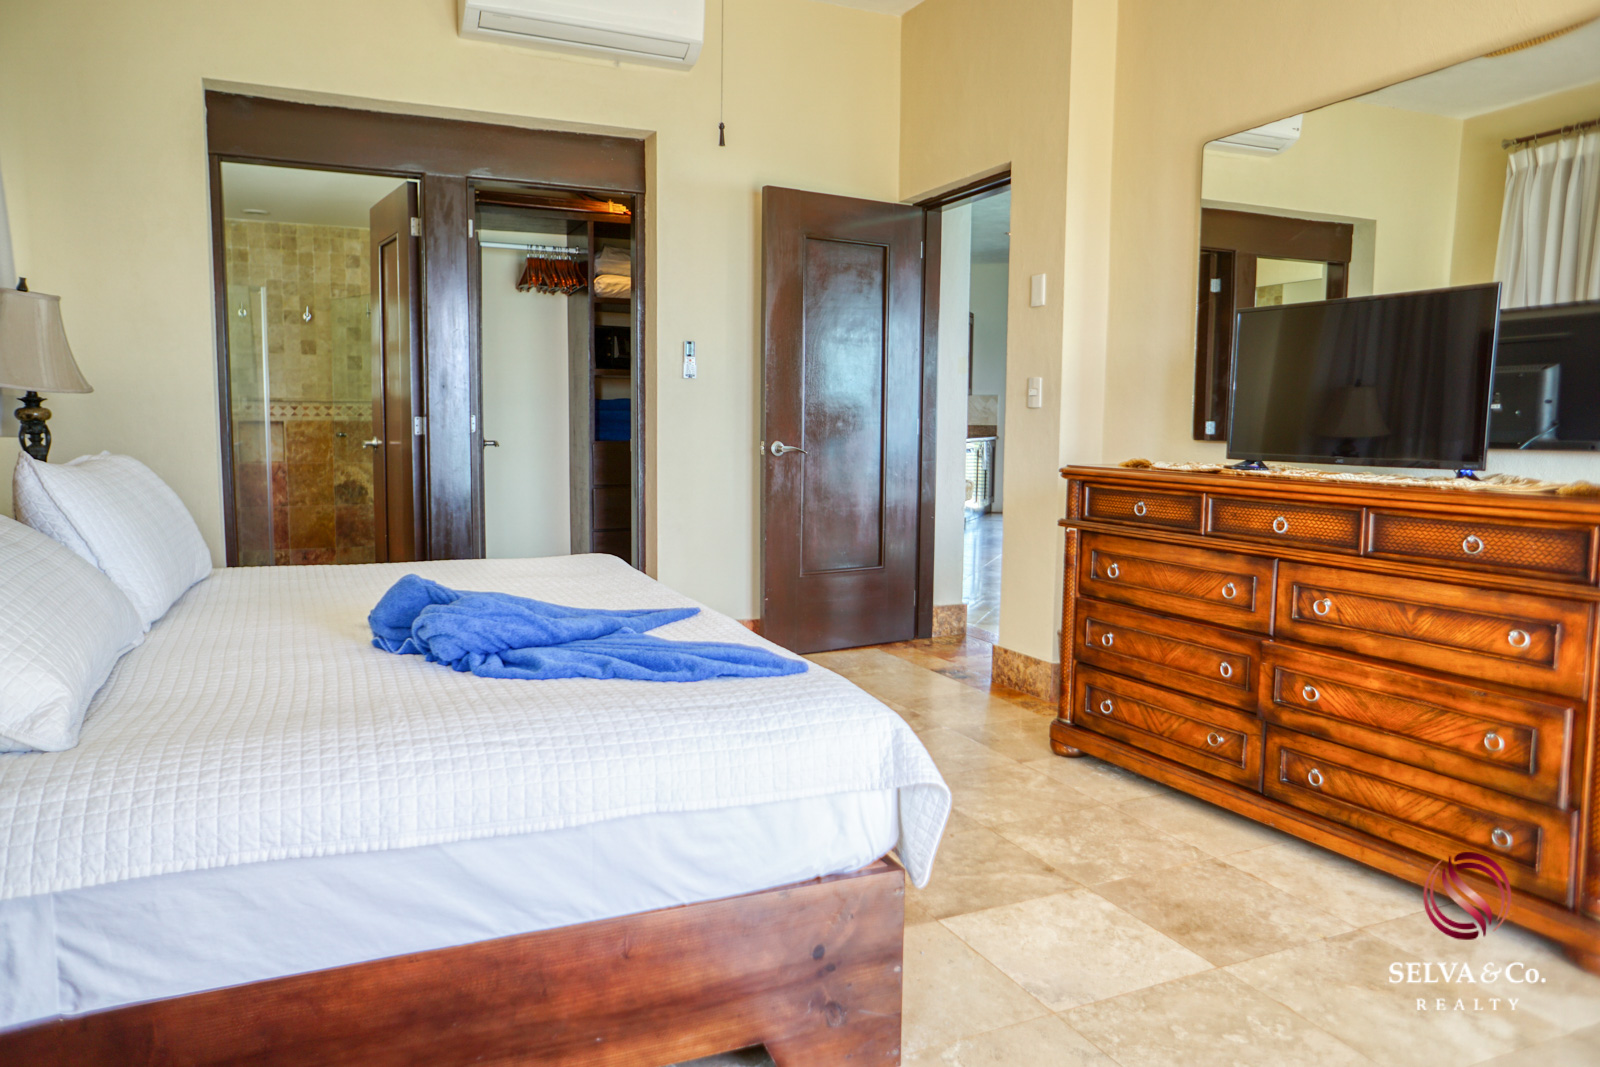 Property with 2 apartments steps from the beach in Playacar phase 1 for sale.